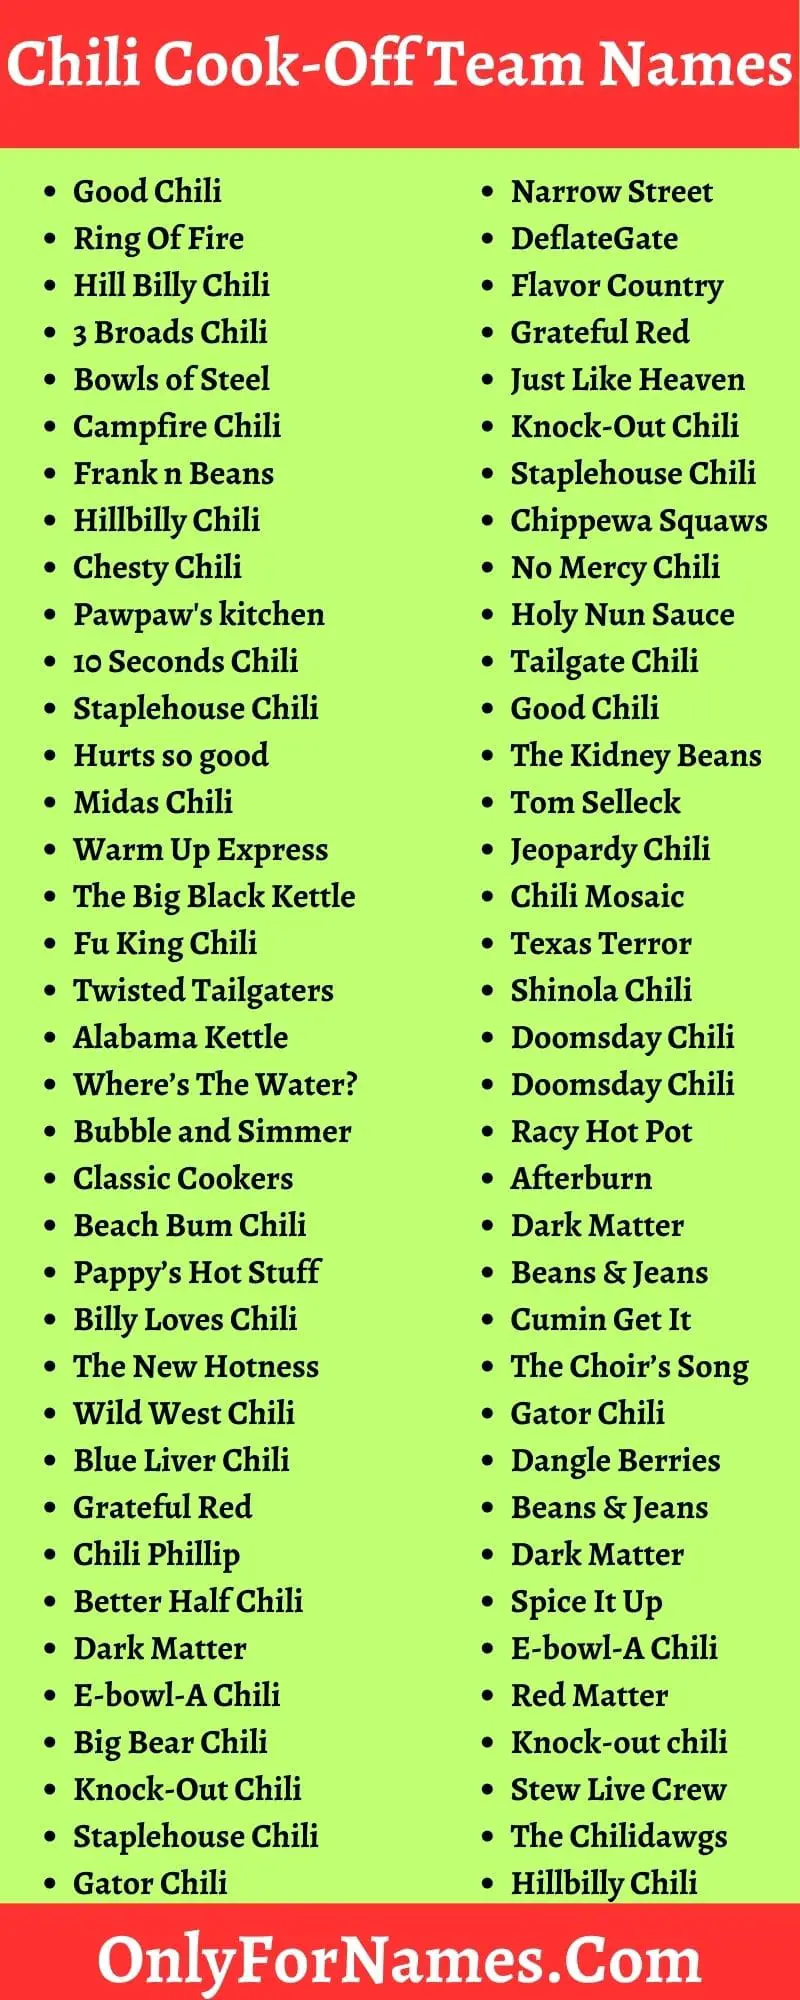 Chili Cook-Off Team Names